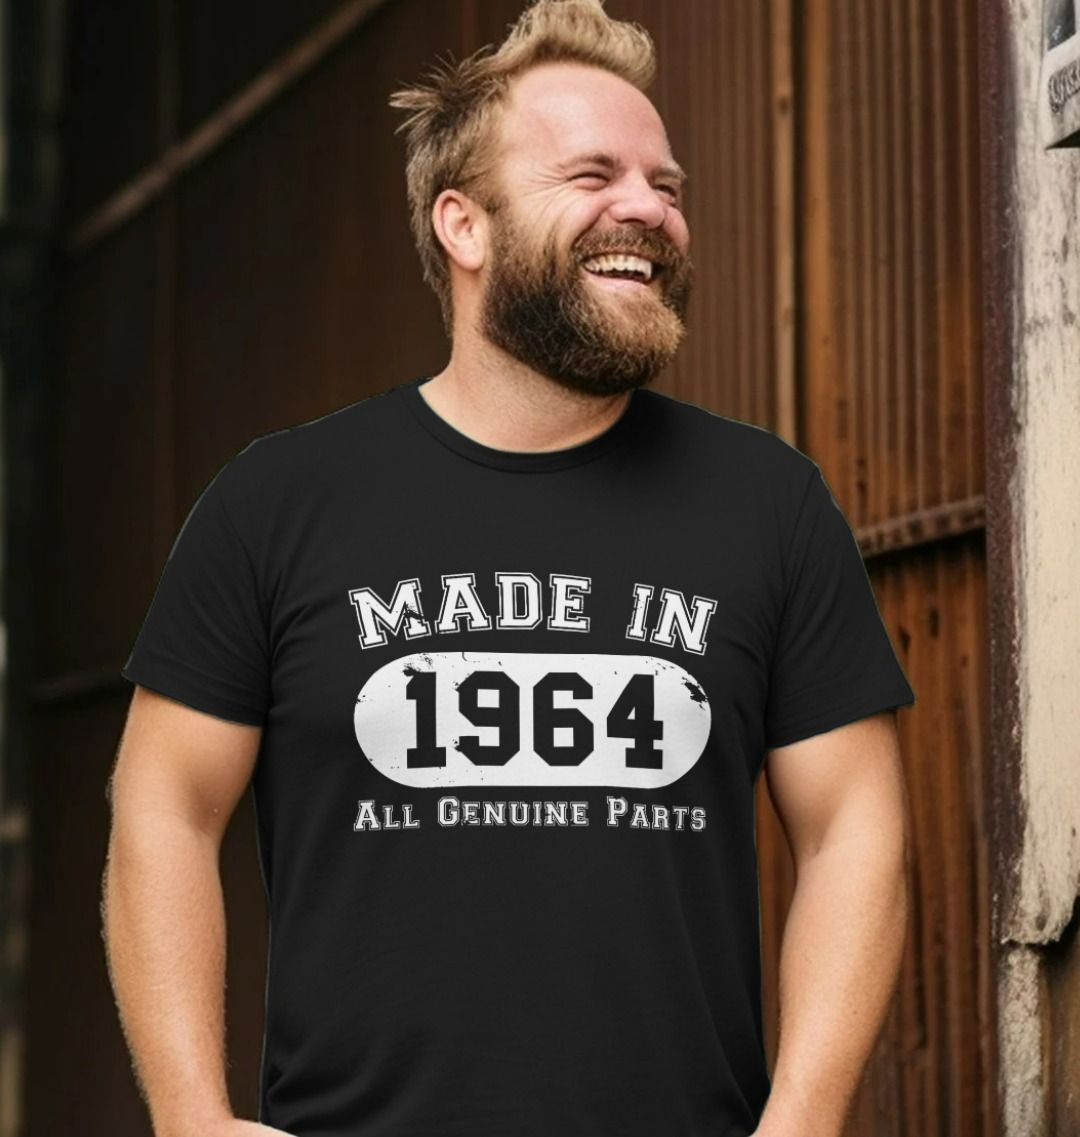 60th Birthday T Shirt Made in 1964 - All Genuine Parts